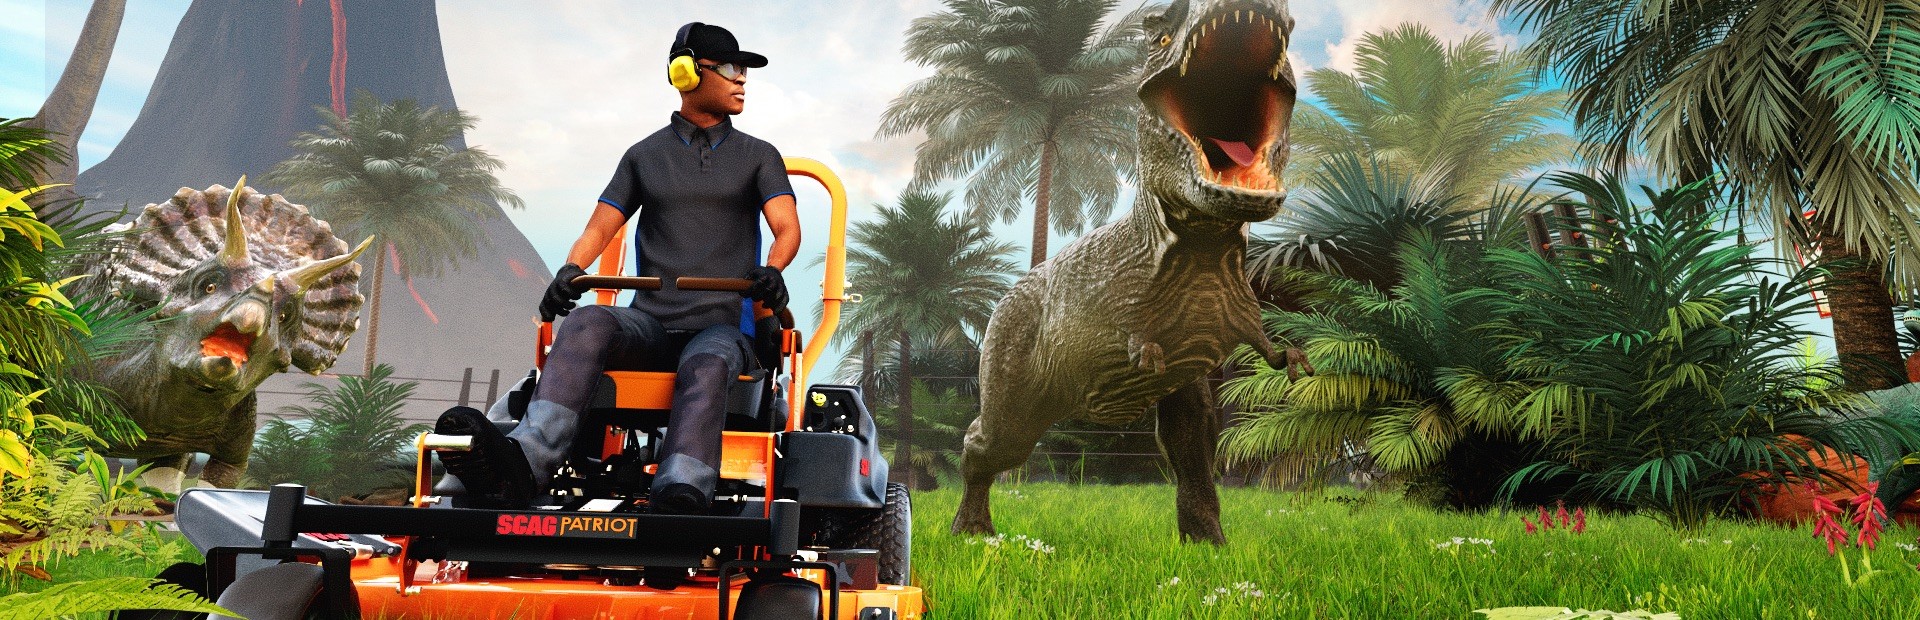 Lawn Mowing Simulator cover image